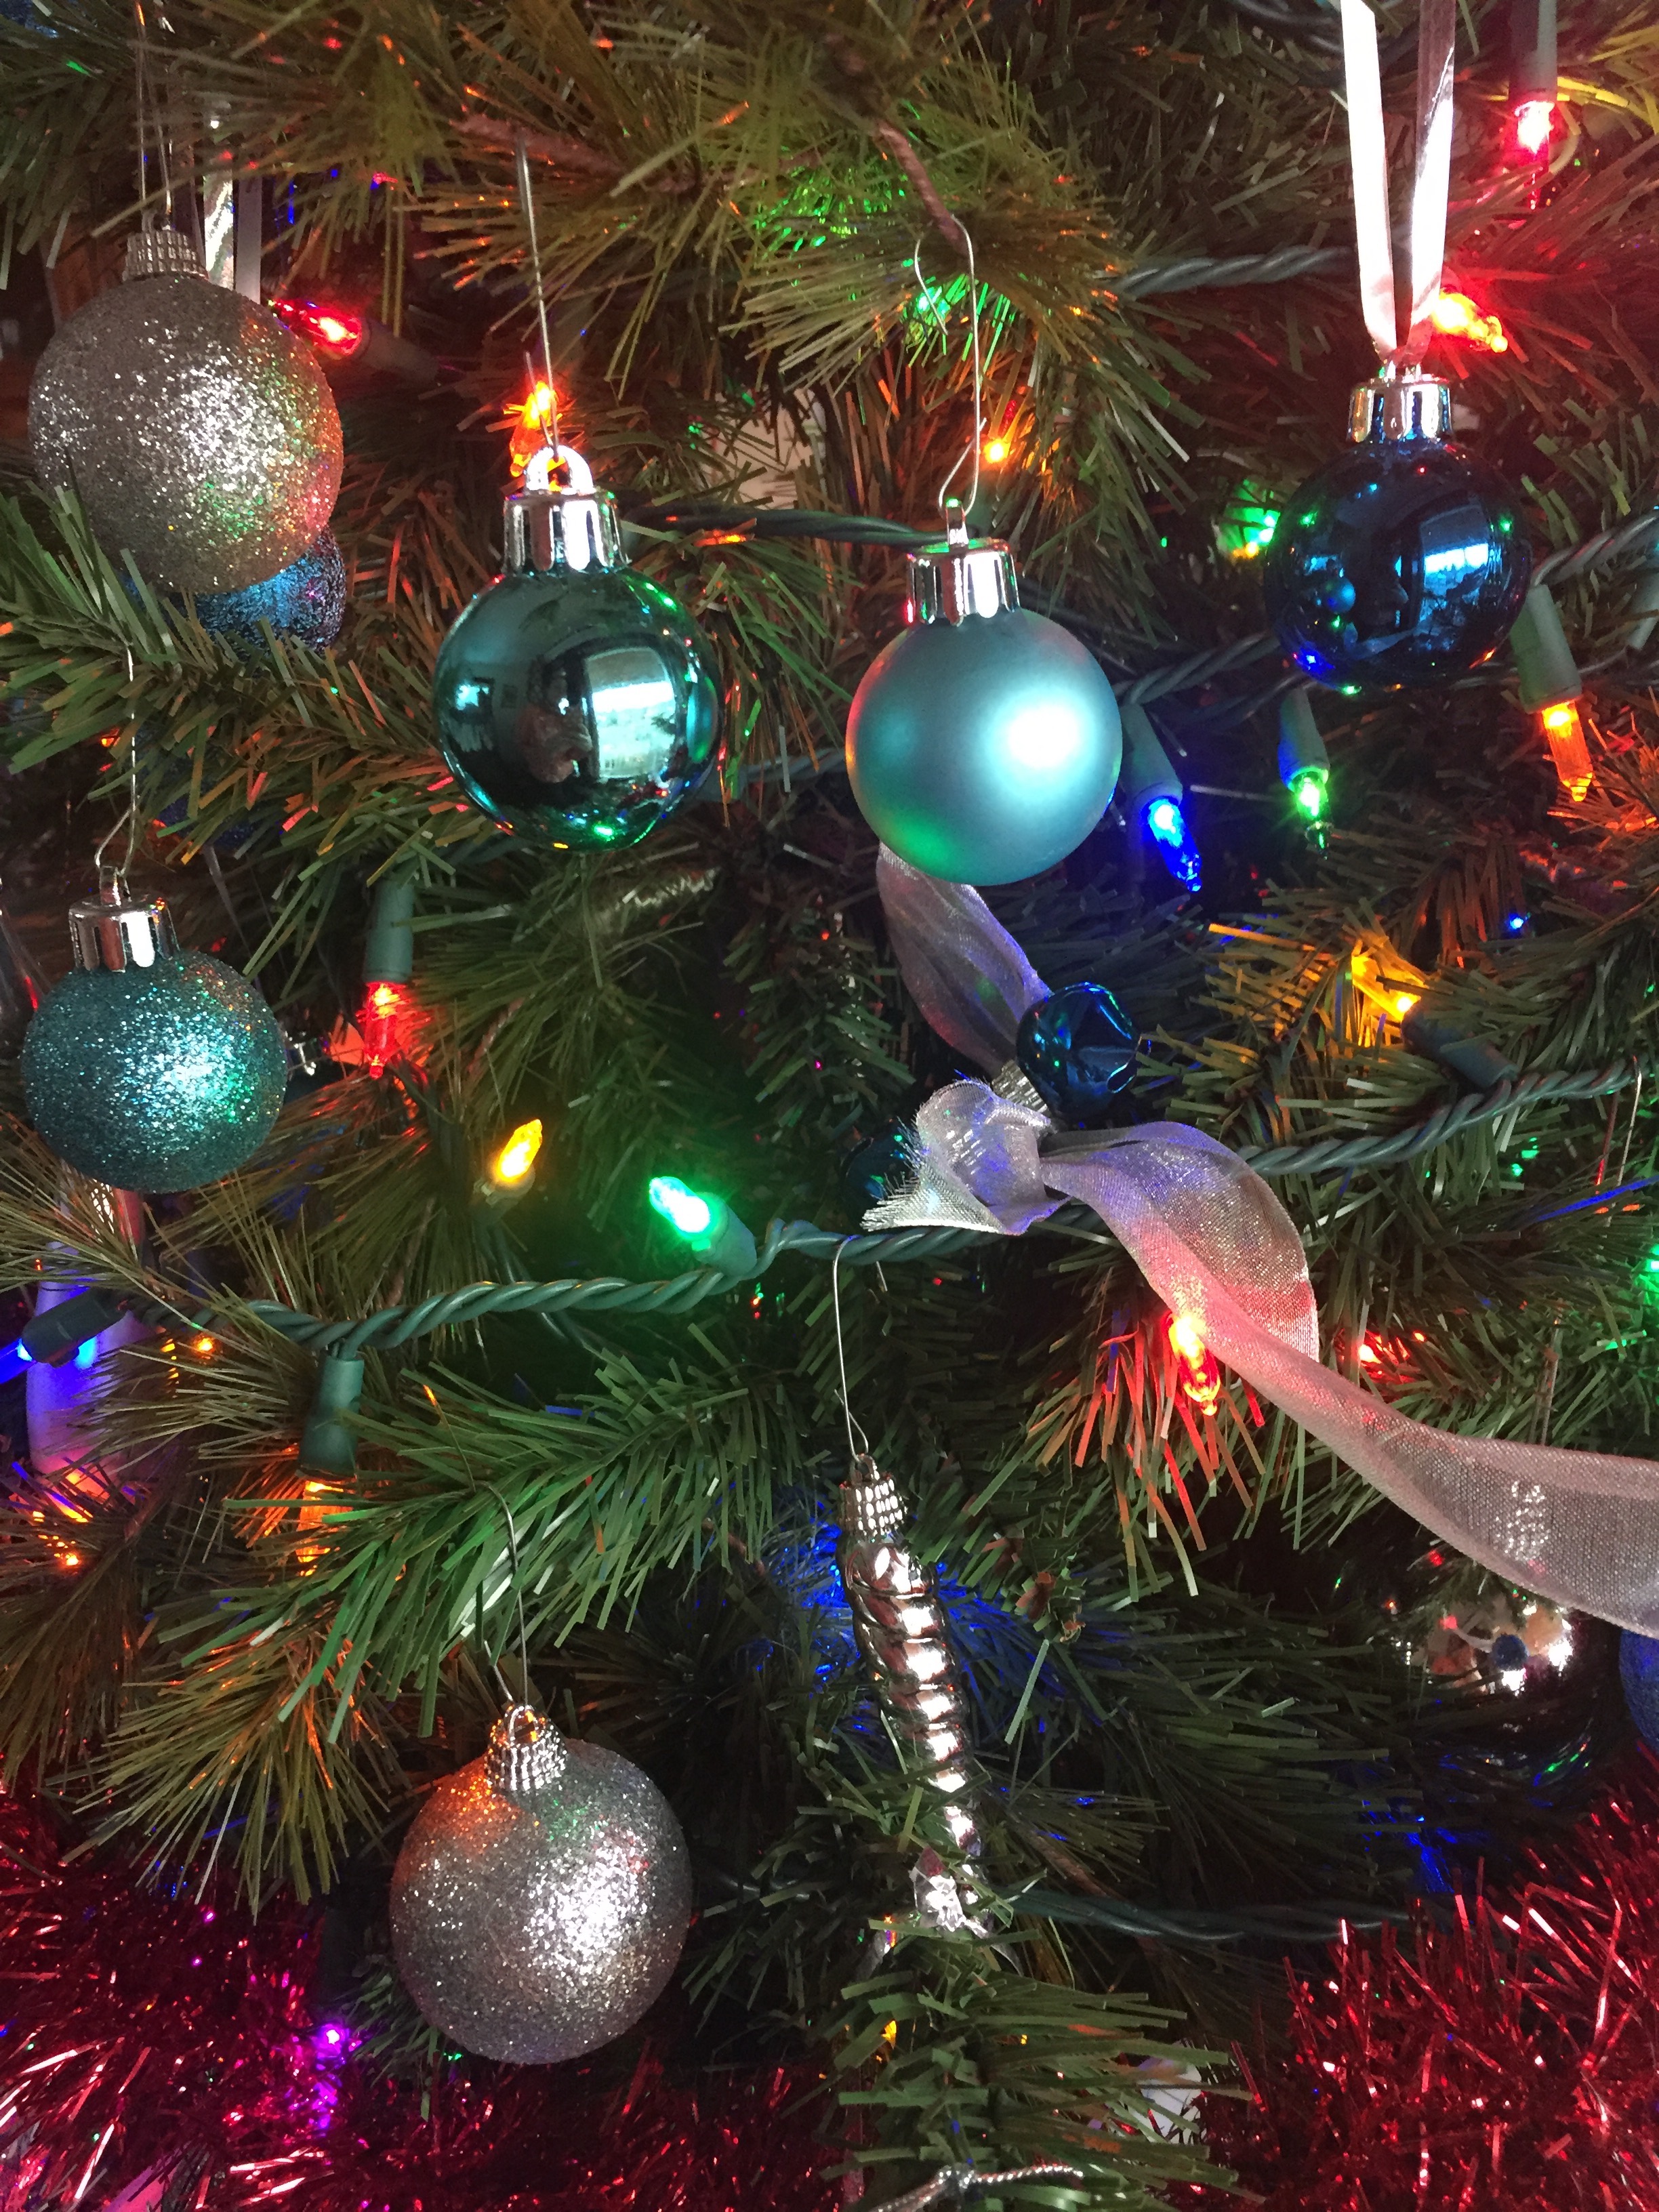 Christmas tree ornaments on tree with lights and tinsel garland